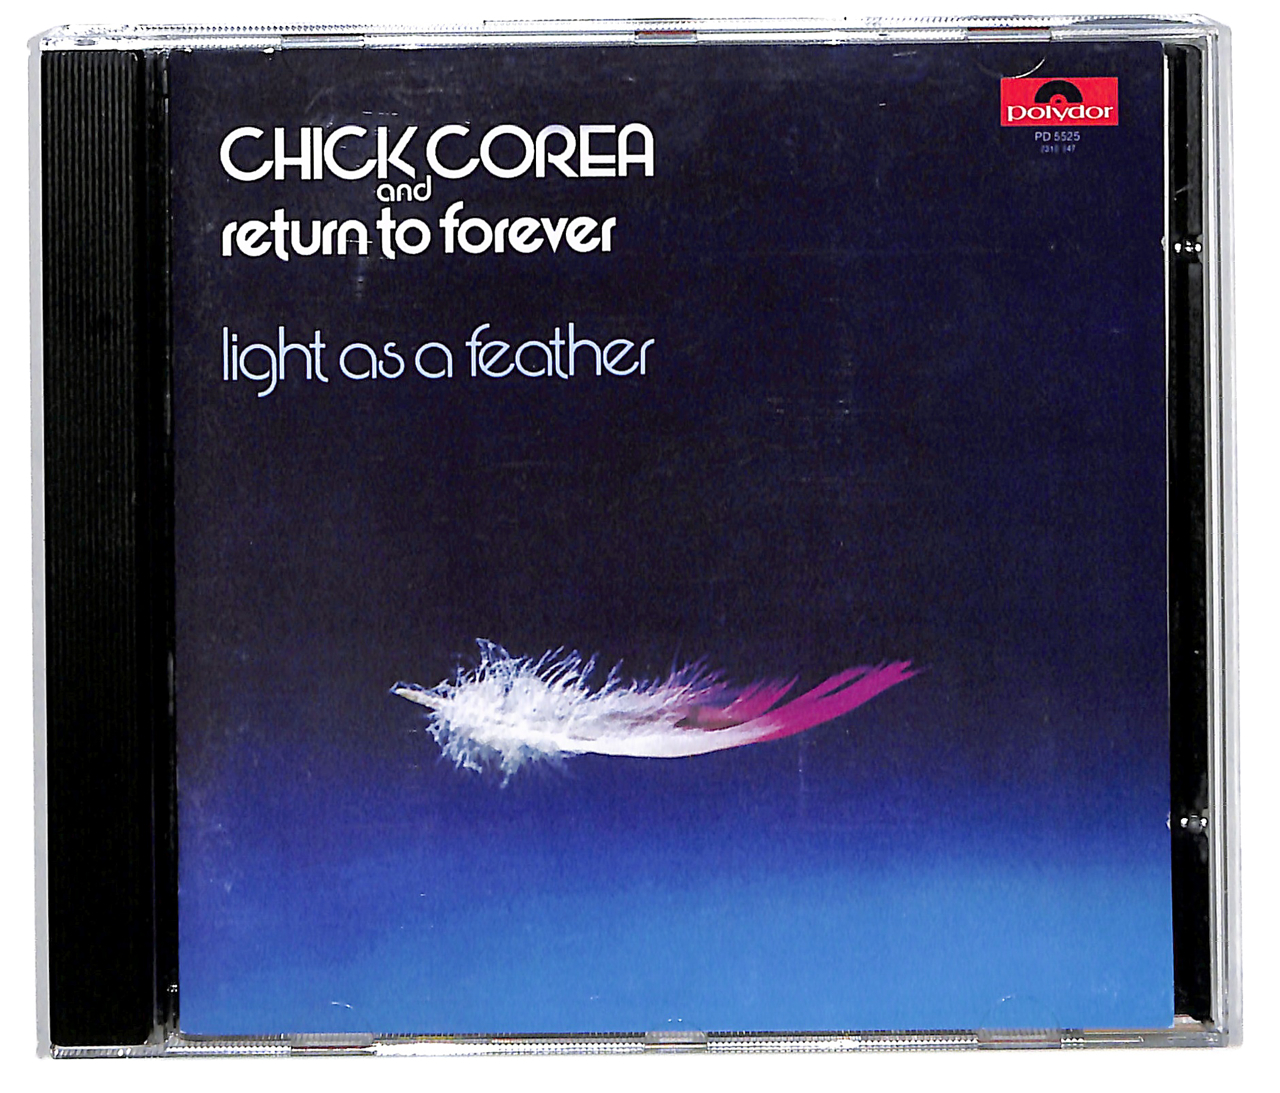 Return to forever  Light as a feather